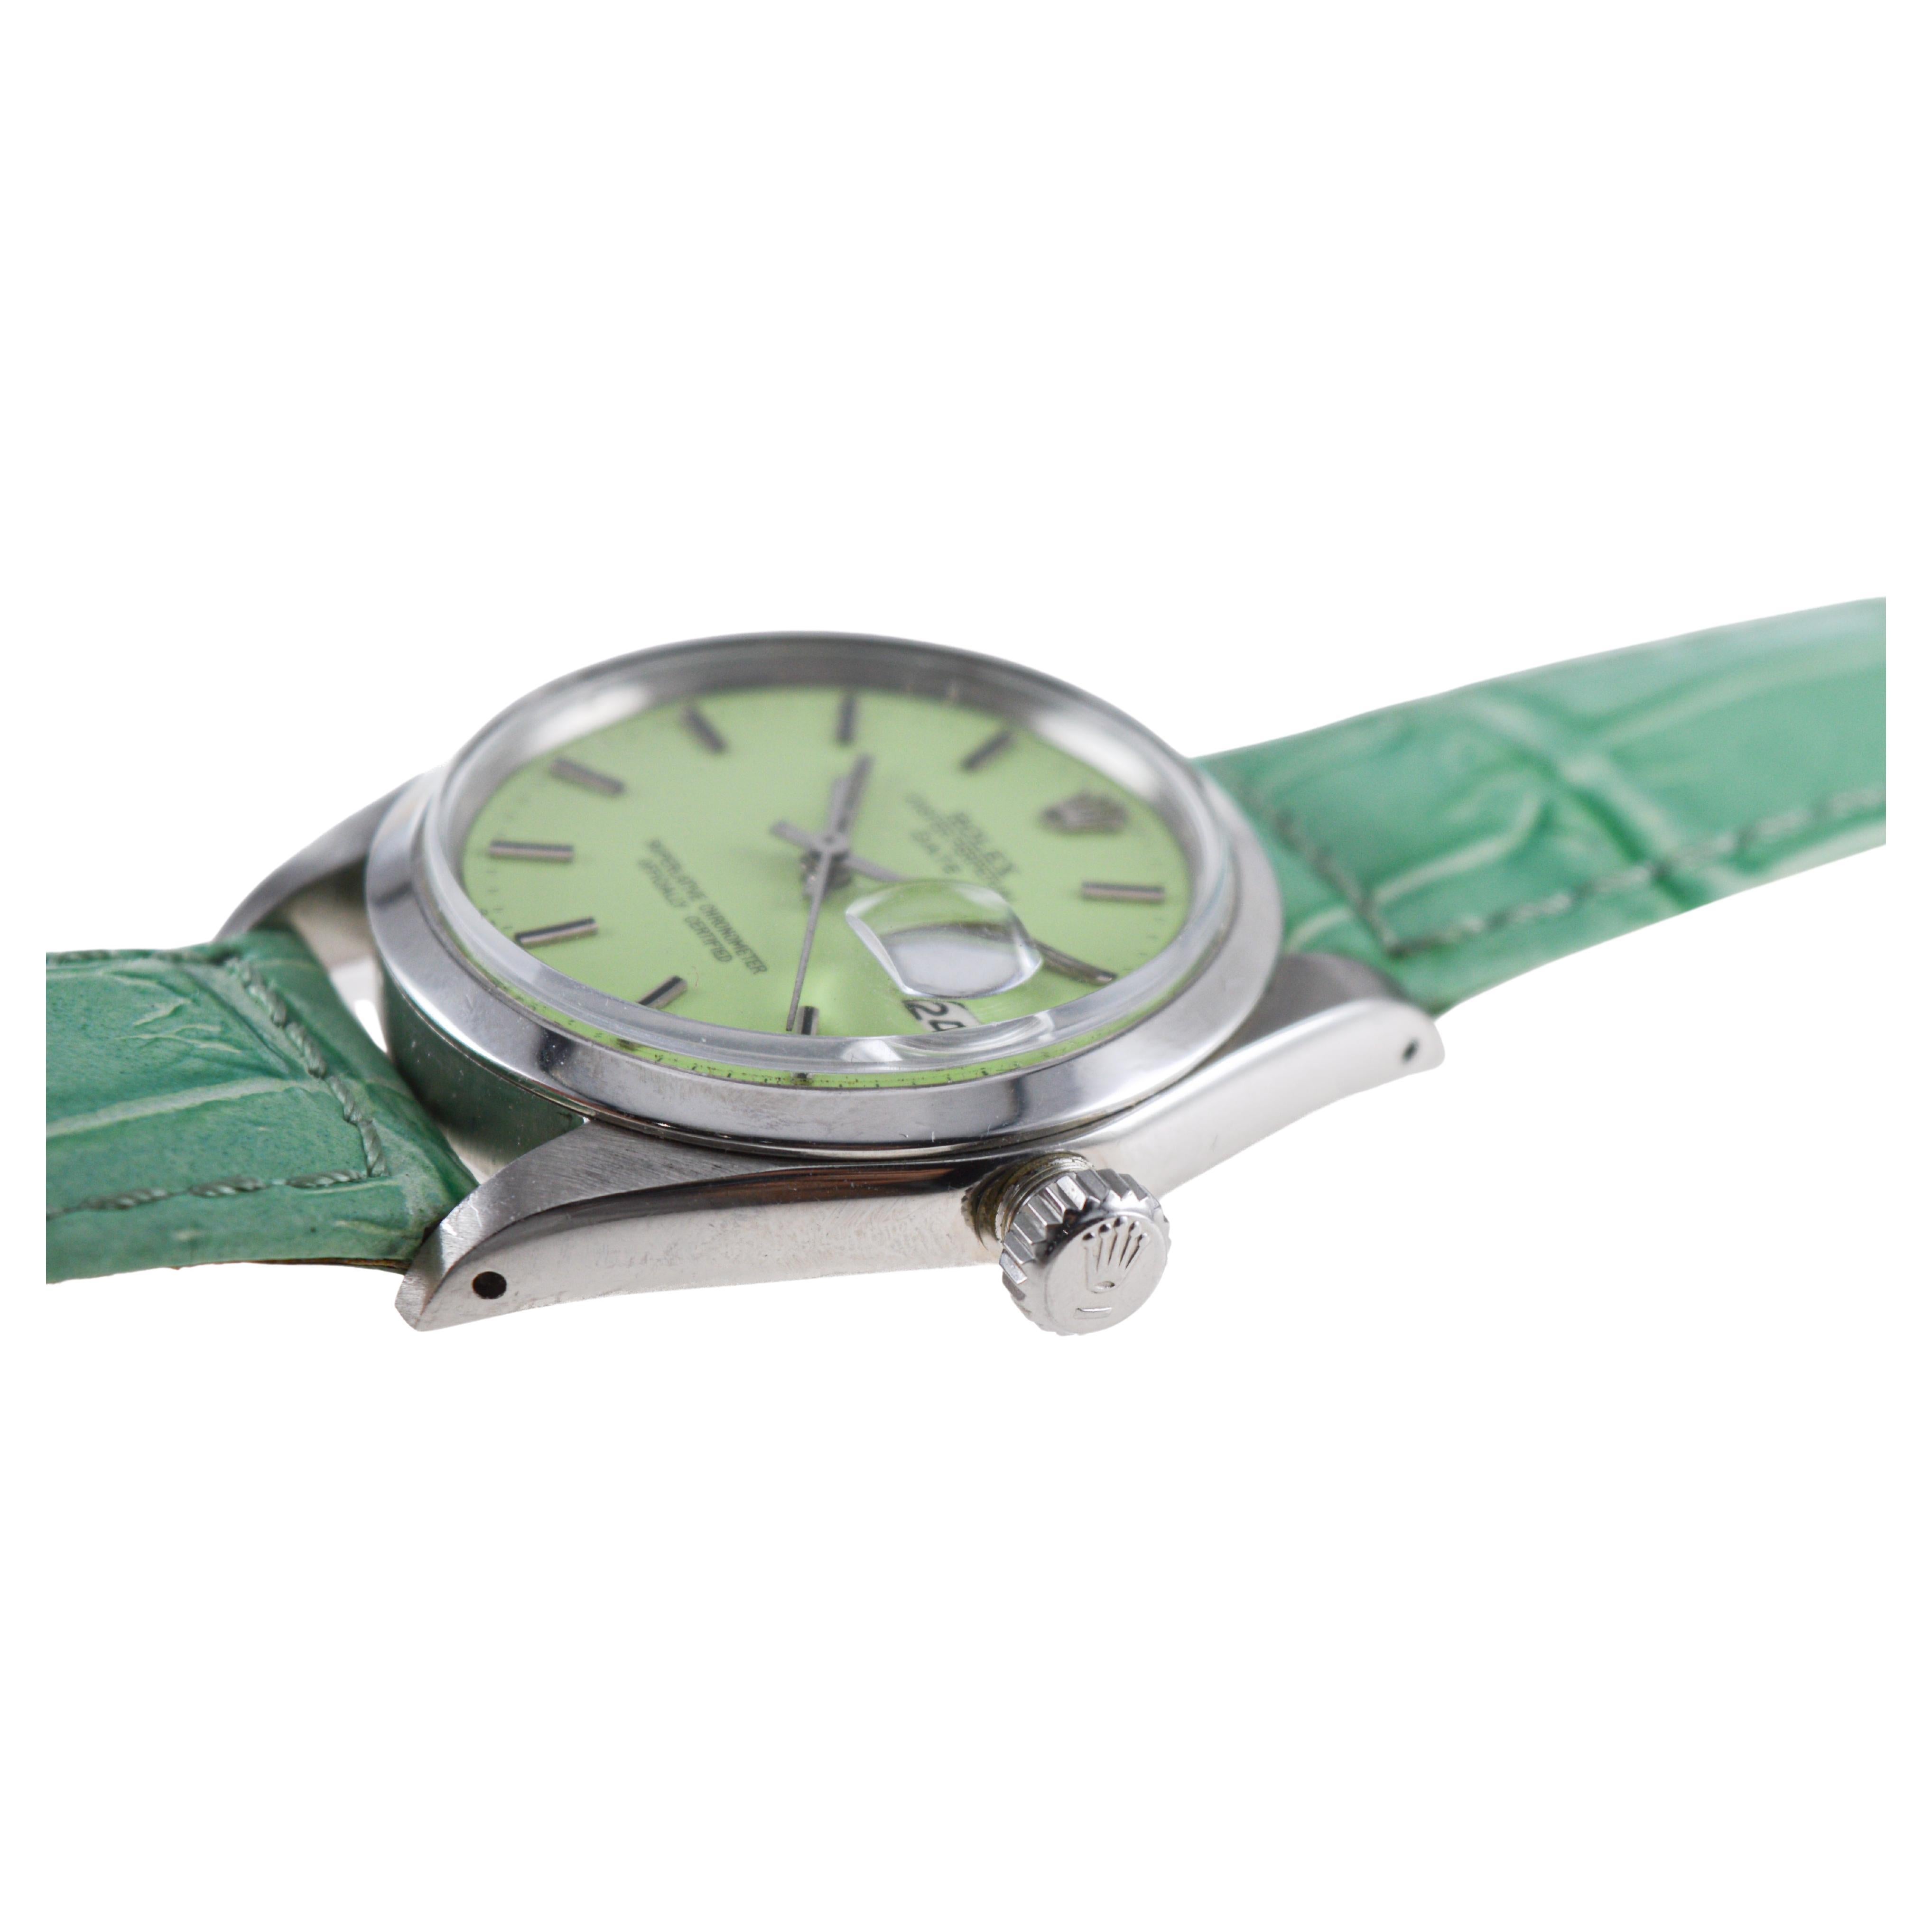 Rolex Steel Oyster Perpetual Date With Custom Made Light Green Dial circa 1970's For Sale 4